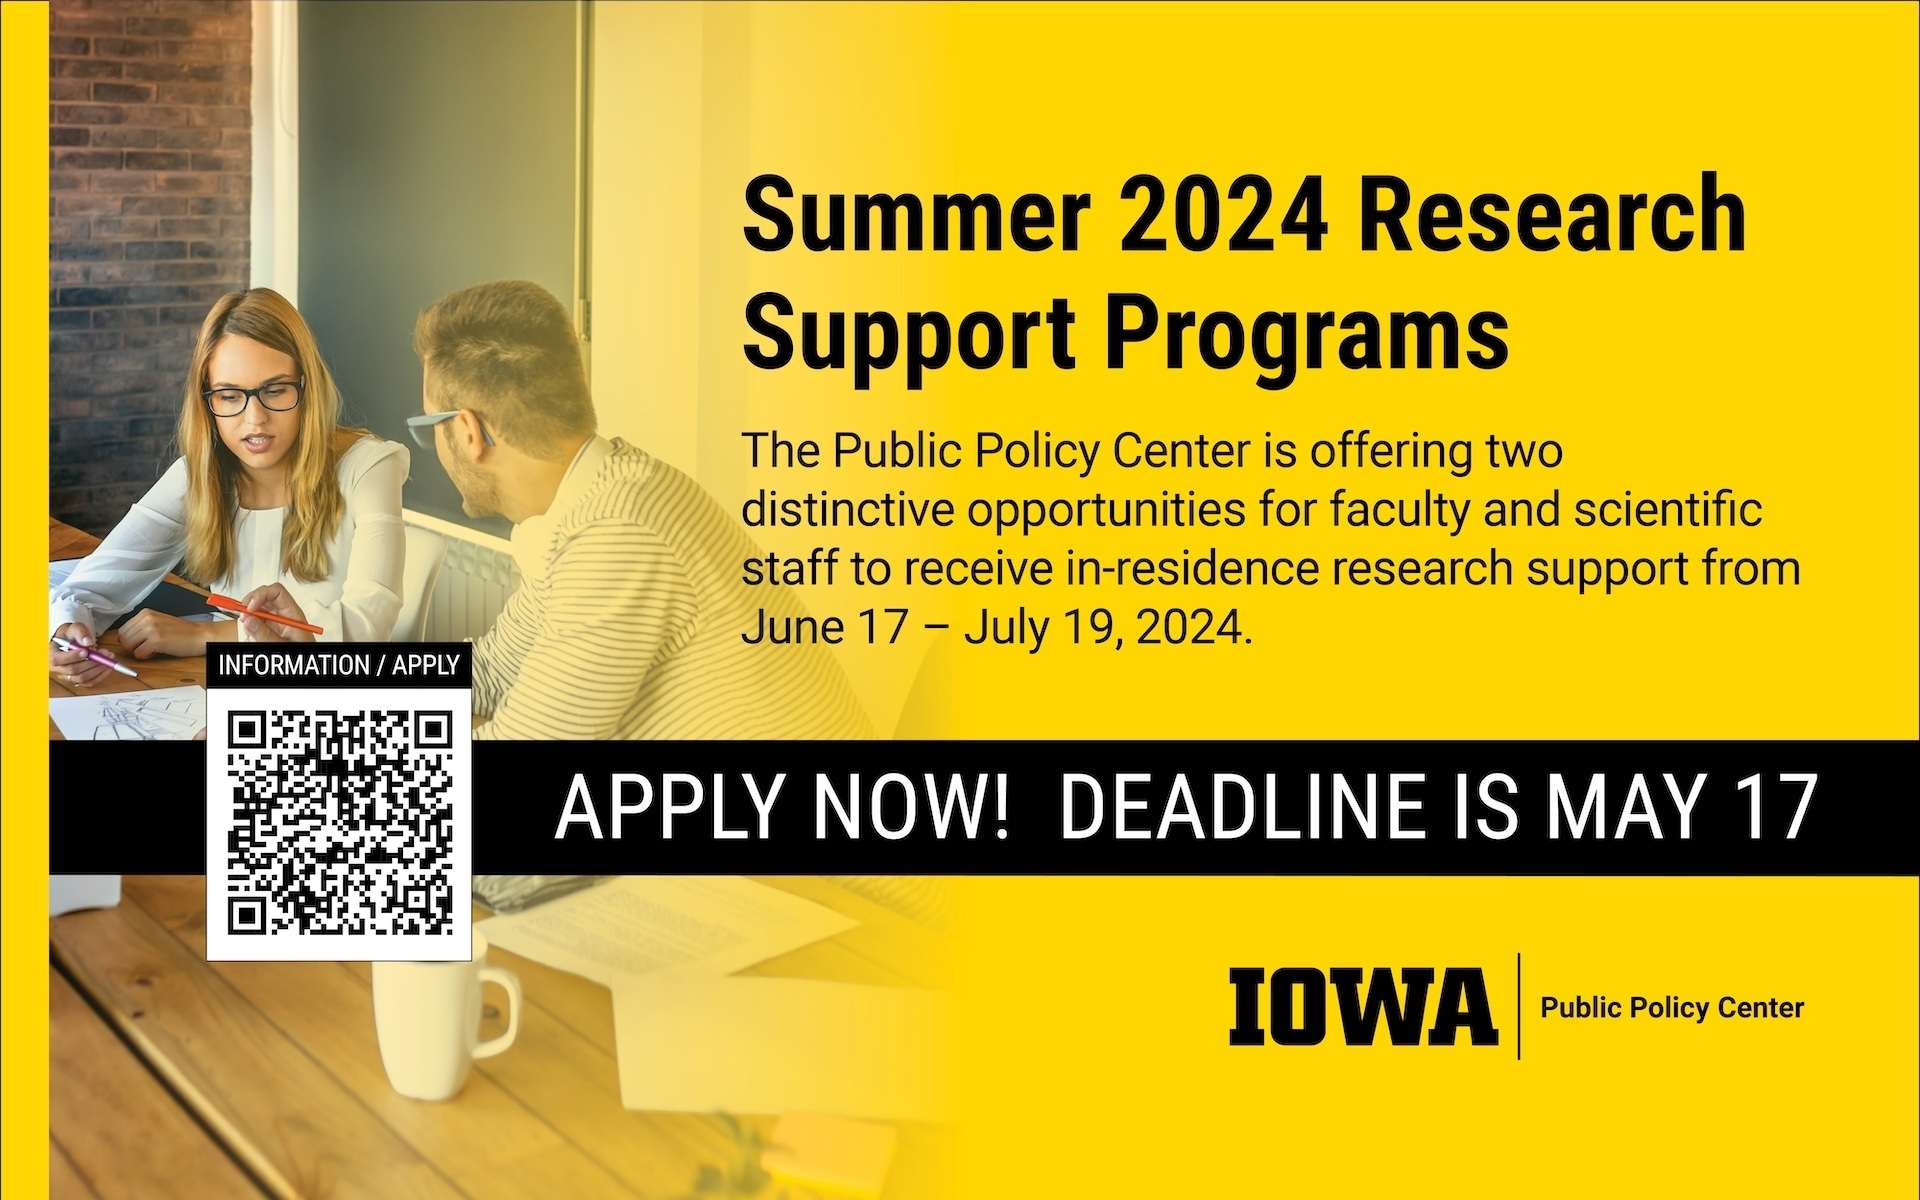 Summer Research Opportunities at the Public Policy Center